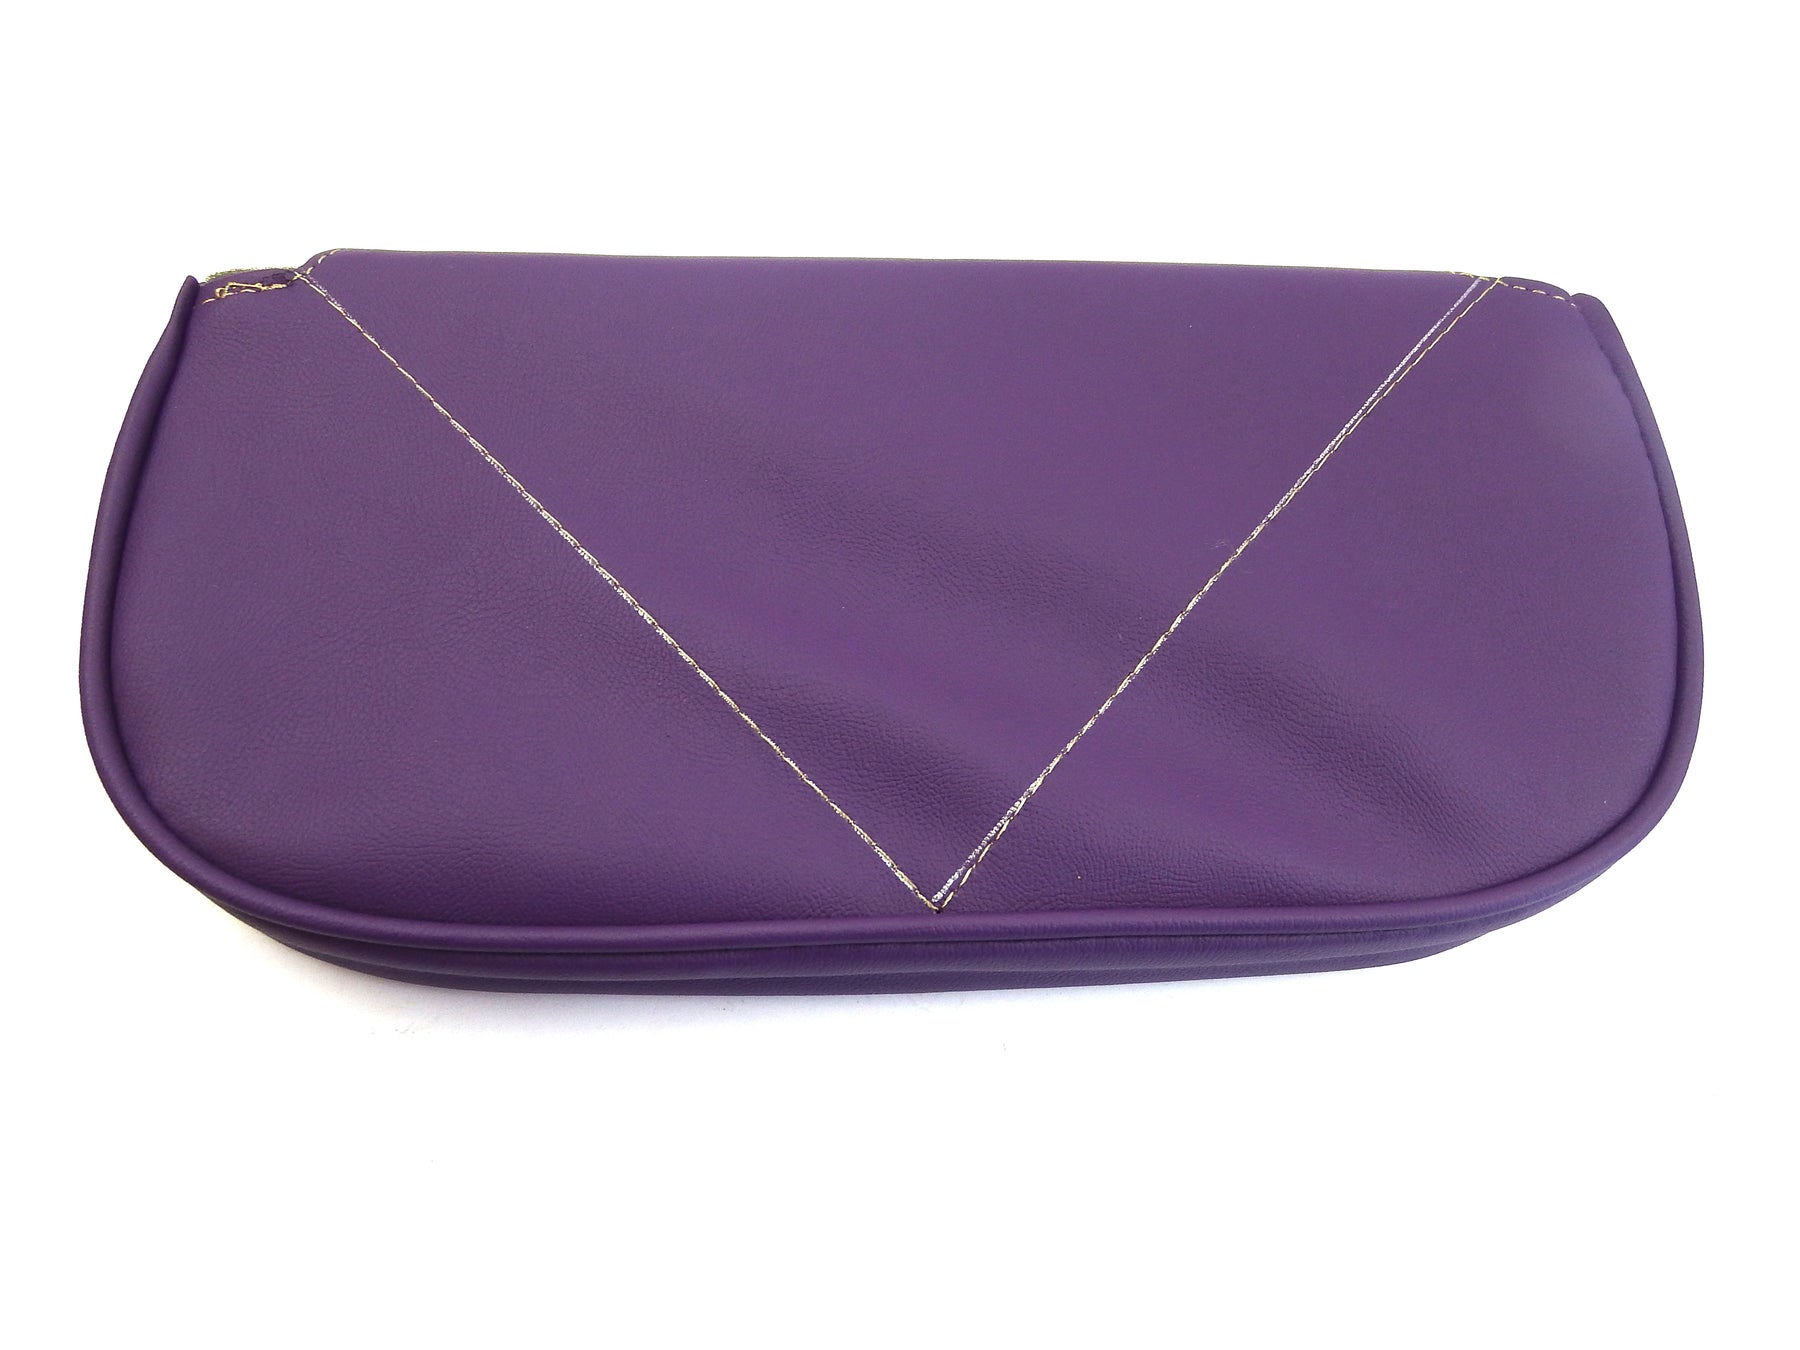 Vespa Lambretta Cuppini Carrier Backrest - Replacement Pad in Custom Colours - Made To Order